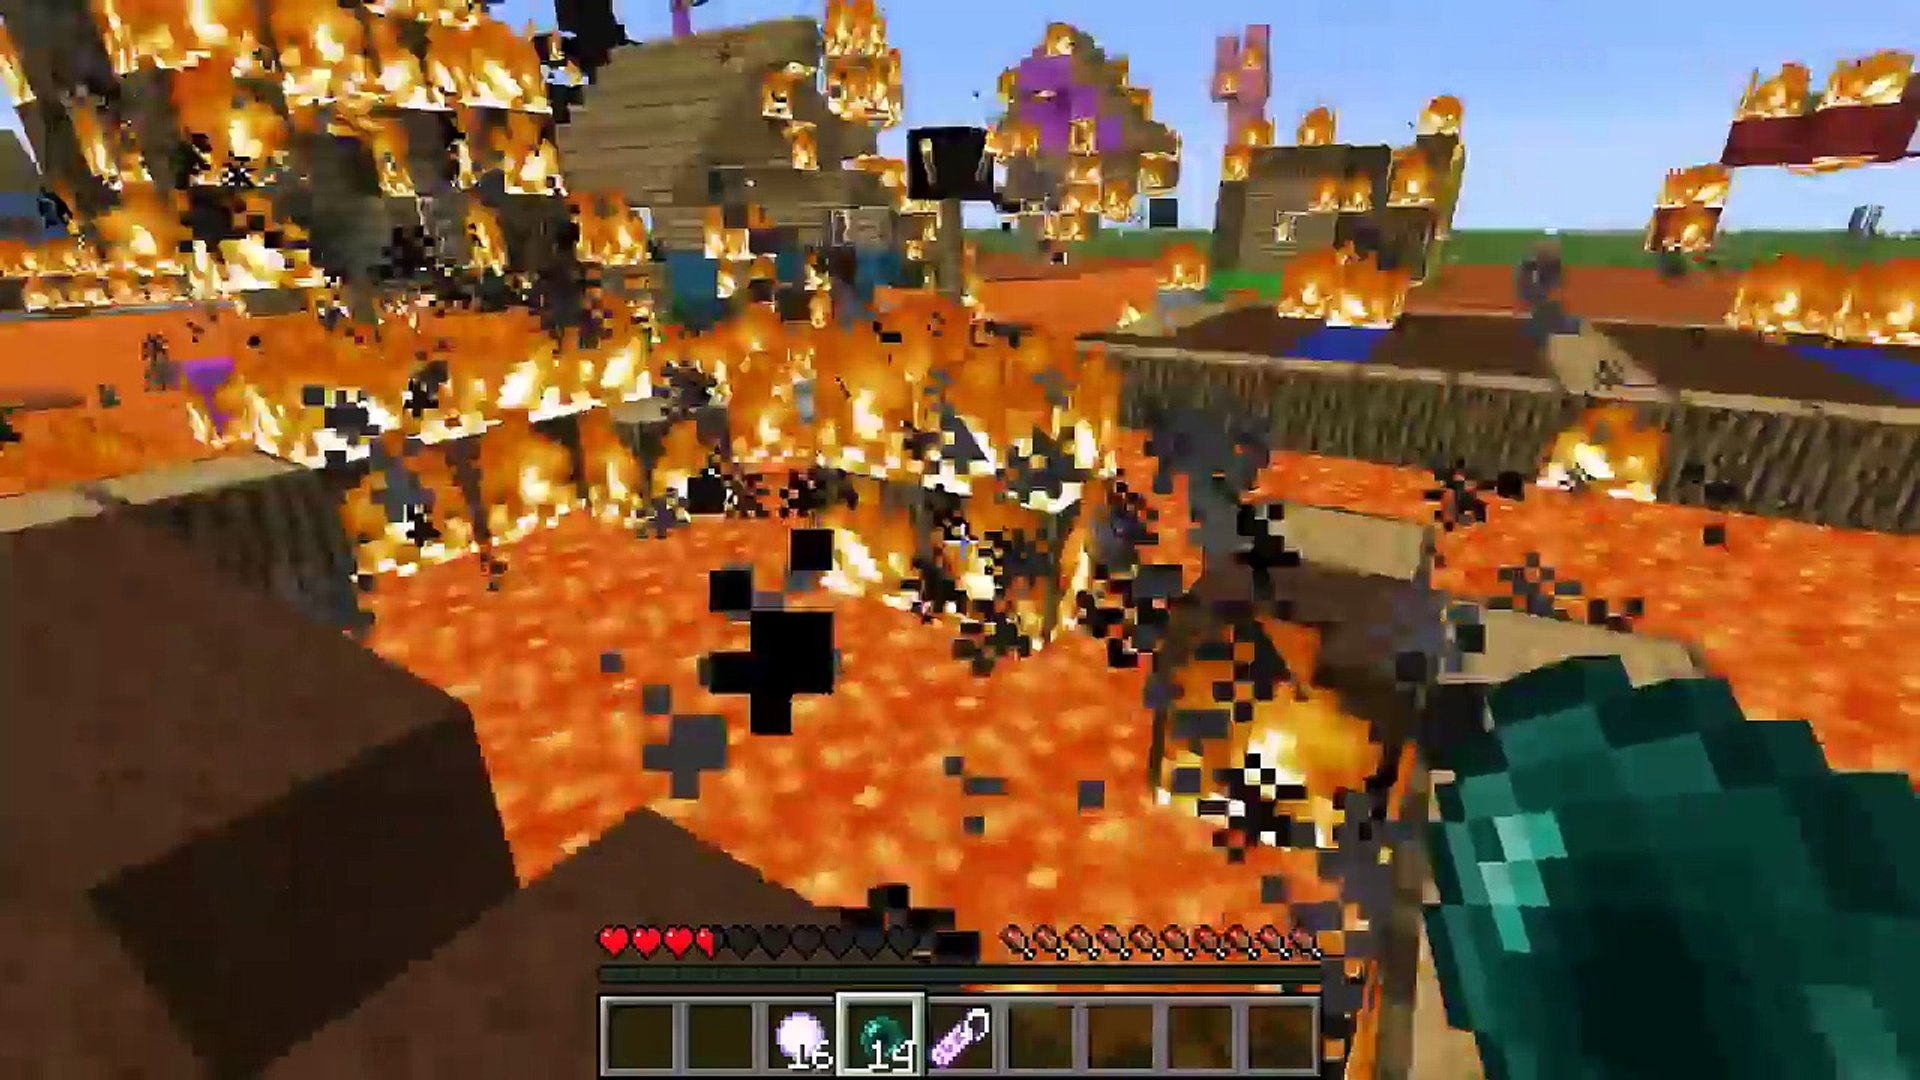 Pat And Jen Popularmmos Minecraft Burning Village Build To Survive Challenge Mini Game Video Dailymotion - roblox videos of pat and jen build to survive